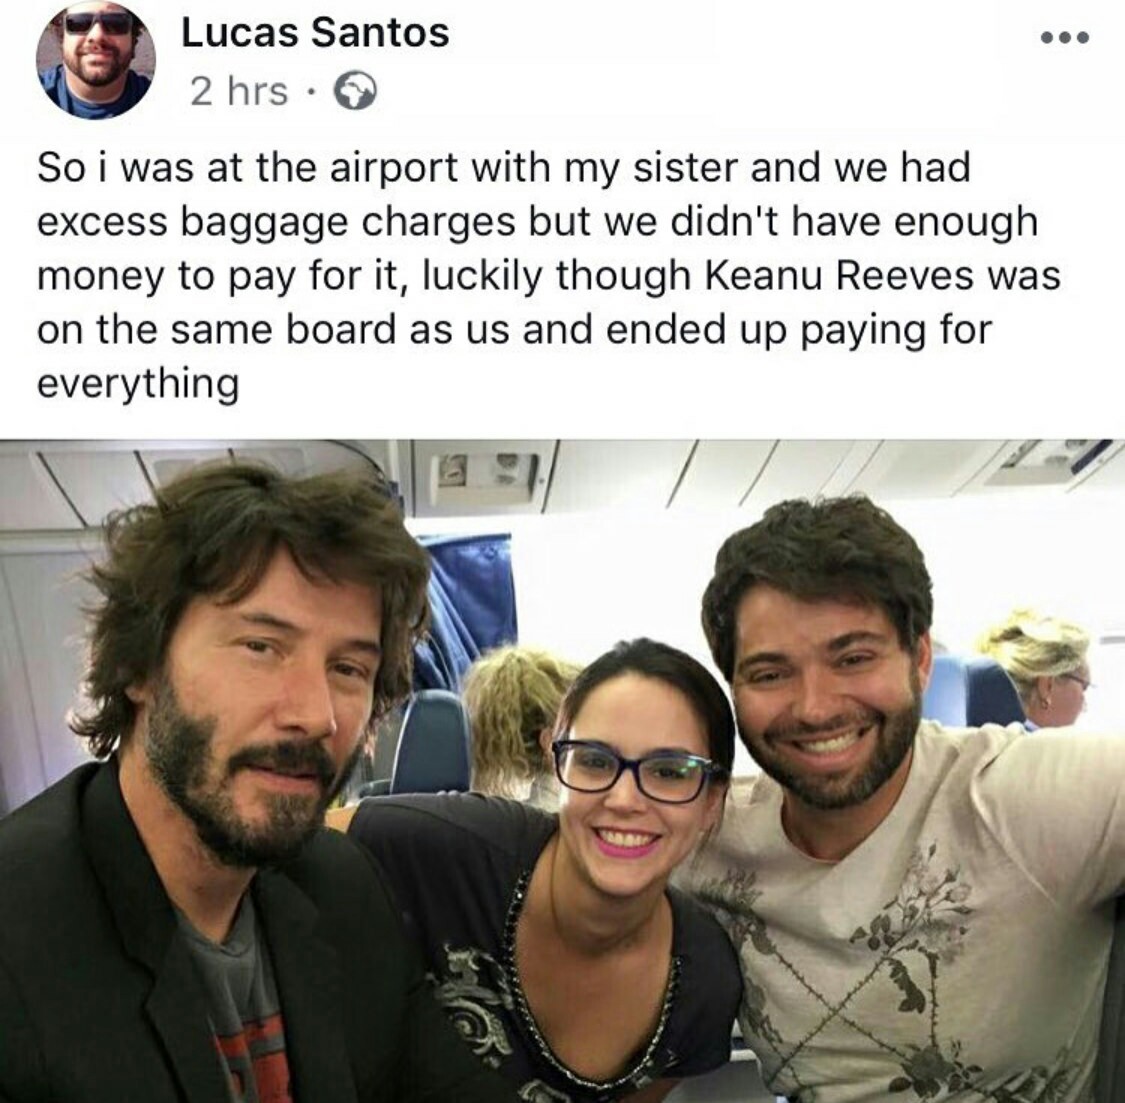 case at the airport - Keanu Reeves, The airport, Overweight, Imgur